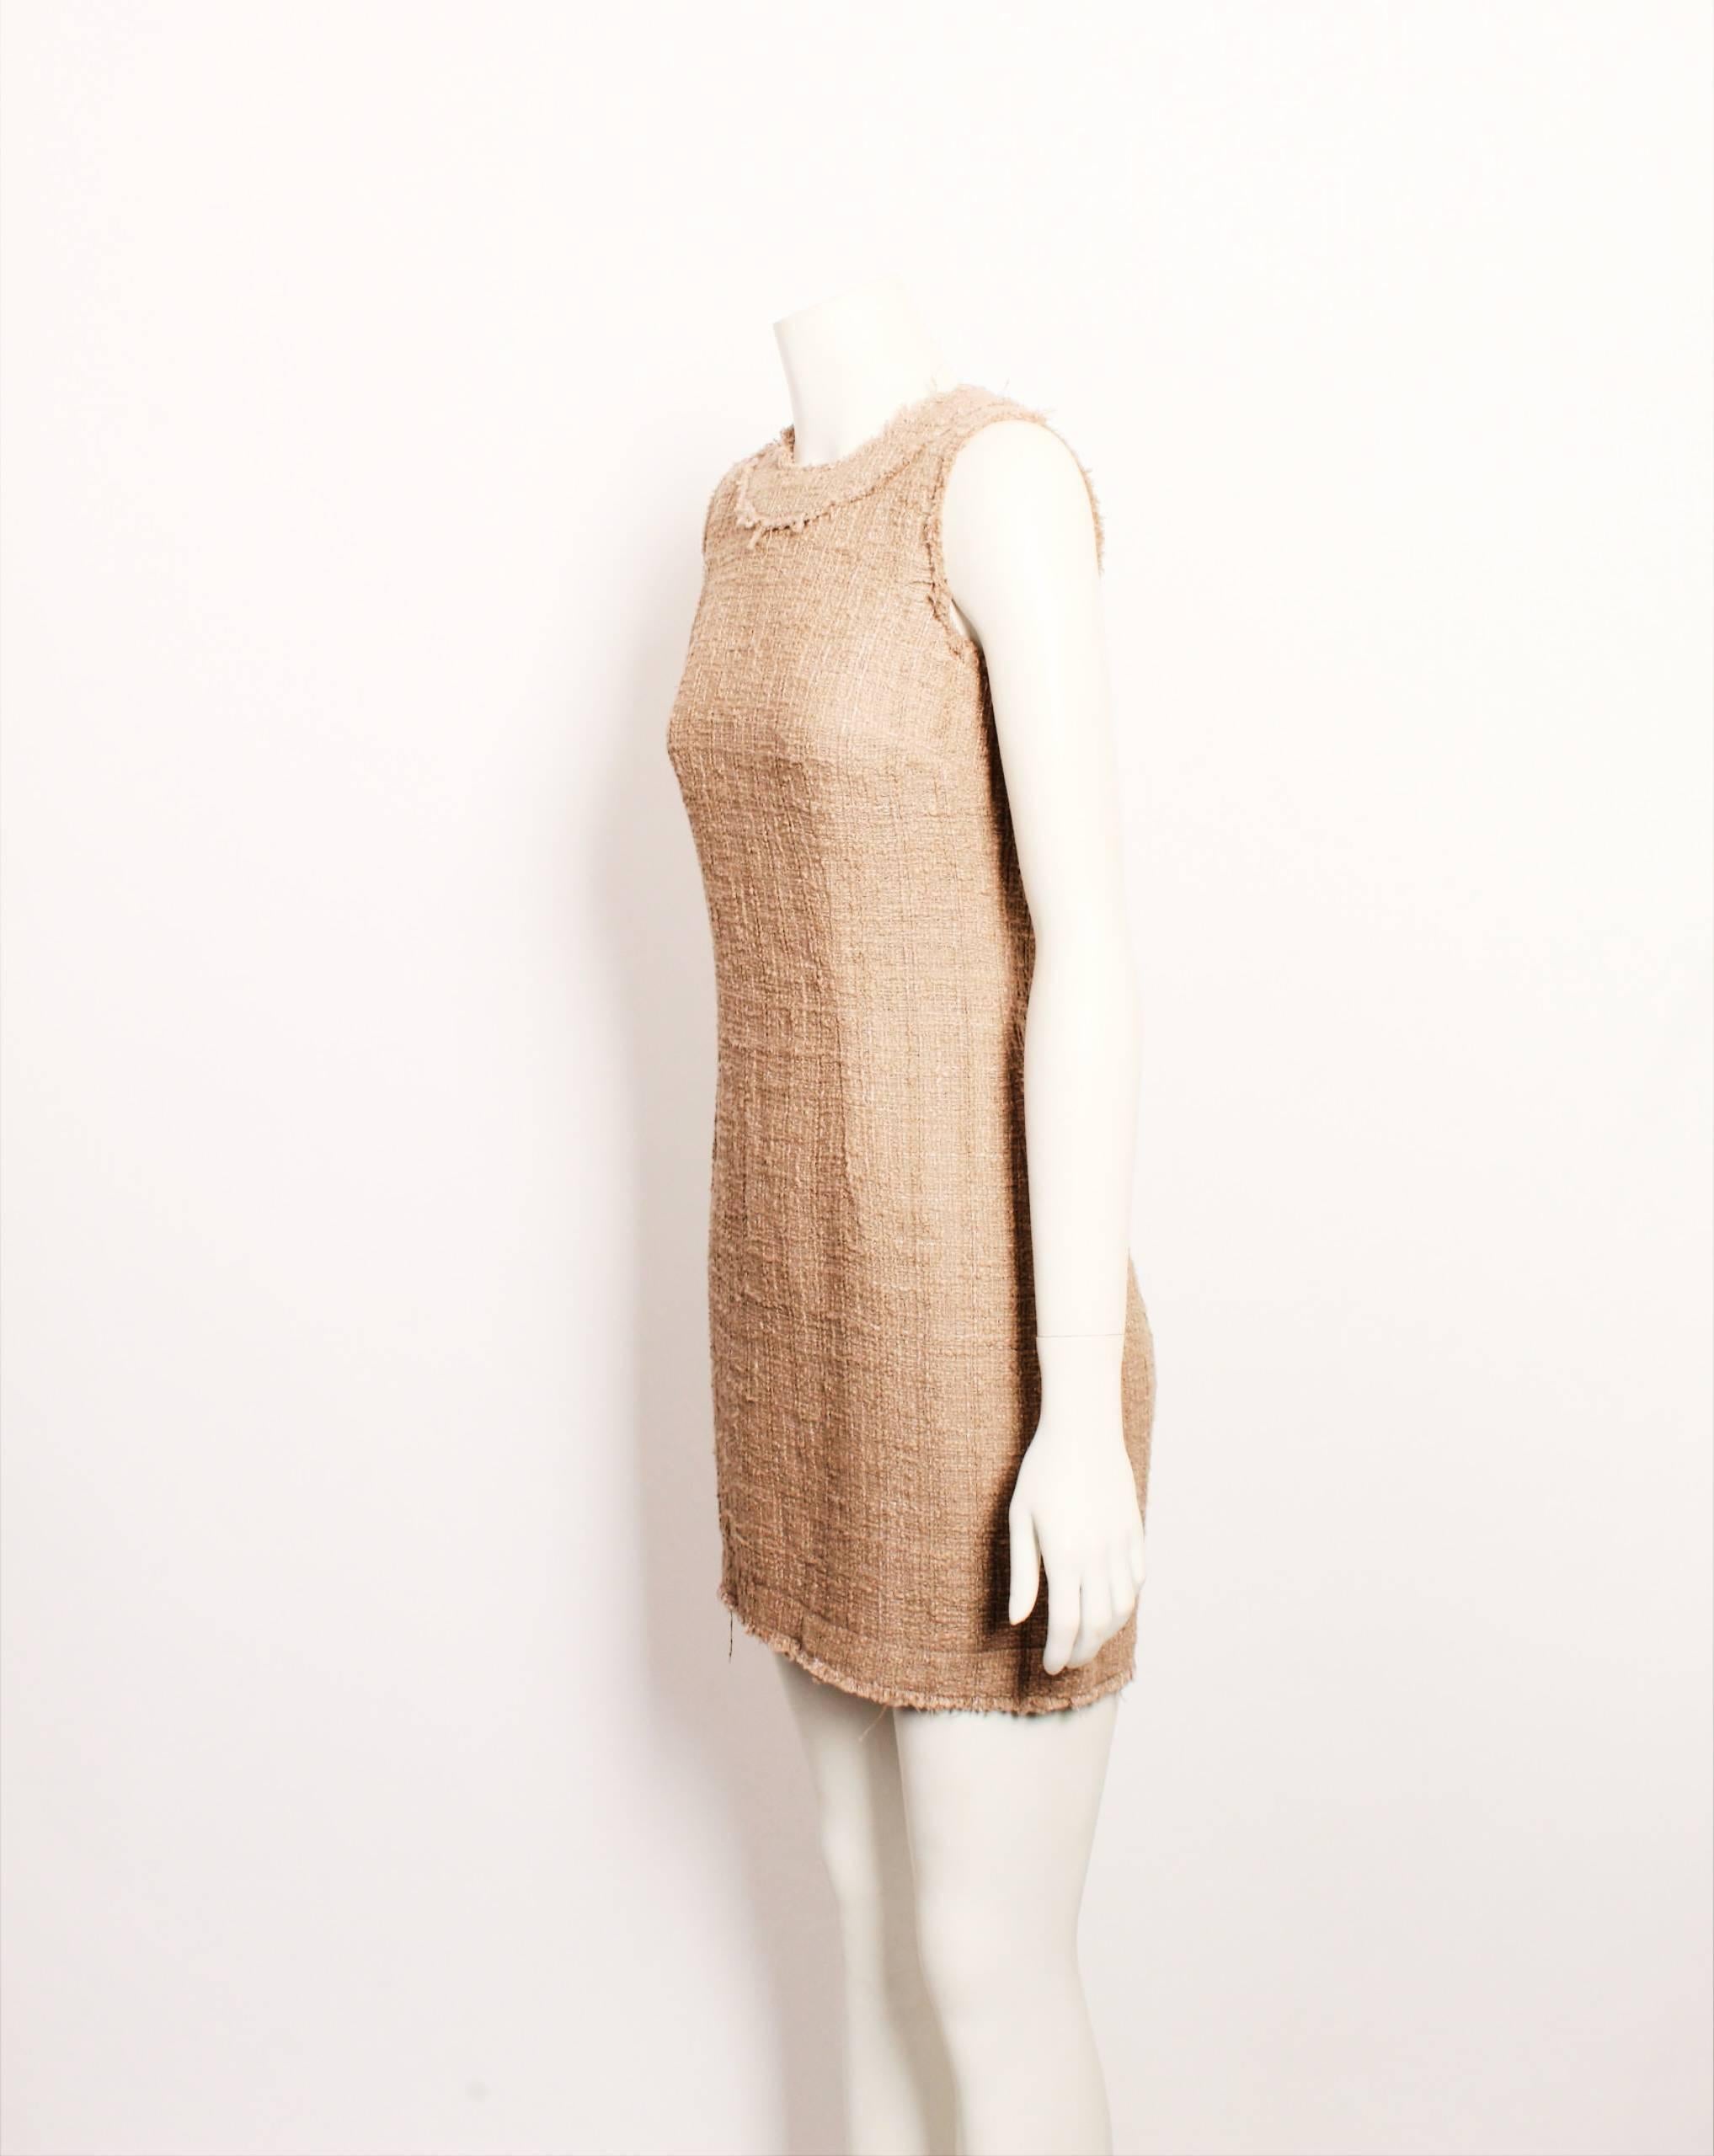 Timeless Dolce & Gabbana beige textural tweed sleeveless mini dress features a fitted body-con silhouette, high round neckline and raw hem finish. Metallic zipper closure with branded pull. Unlined. 
Made in Italy. Size 38. 